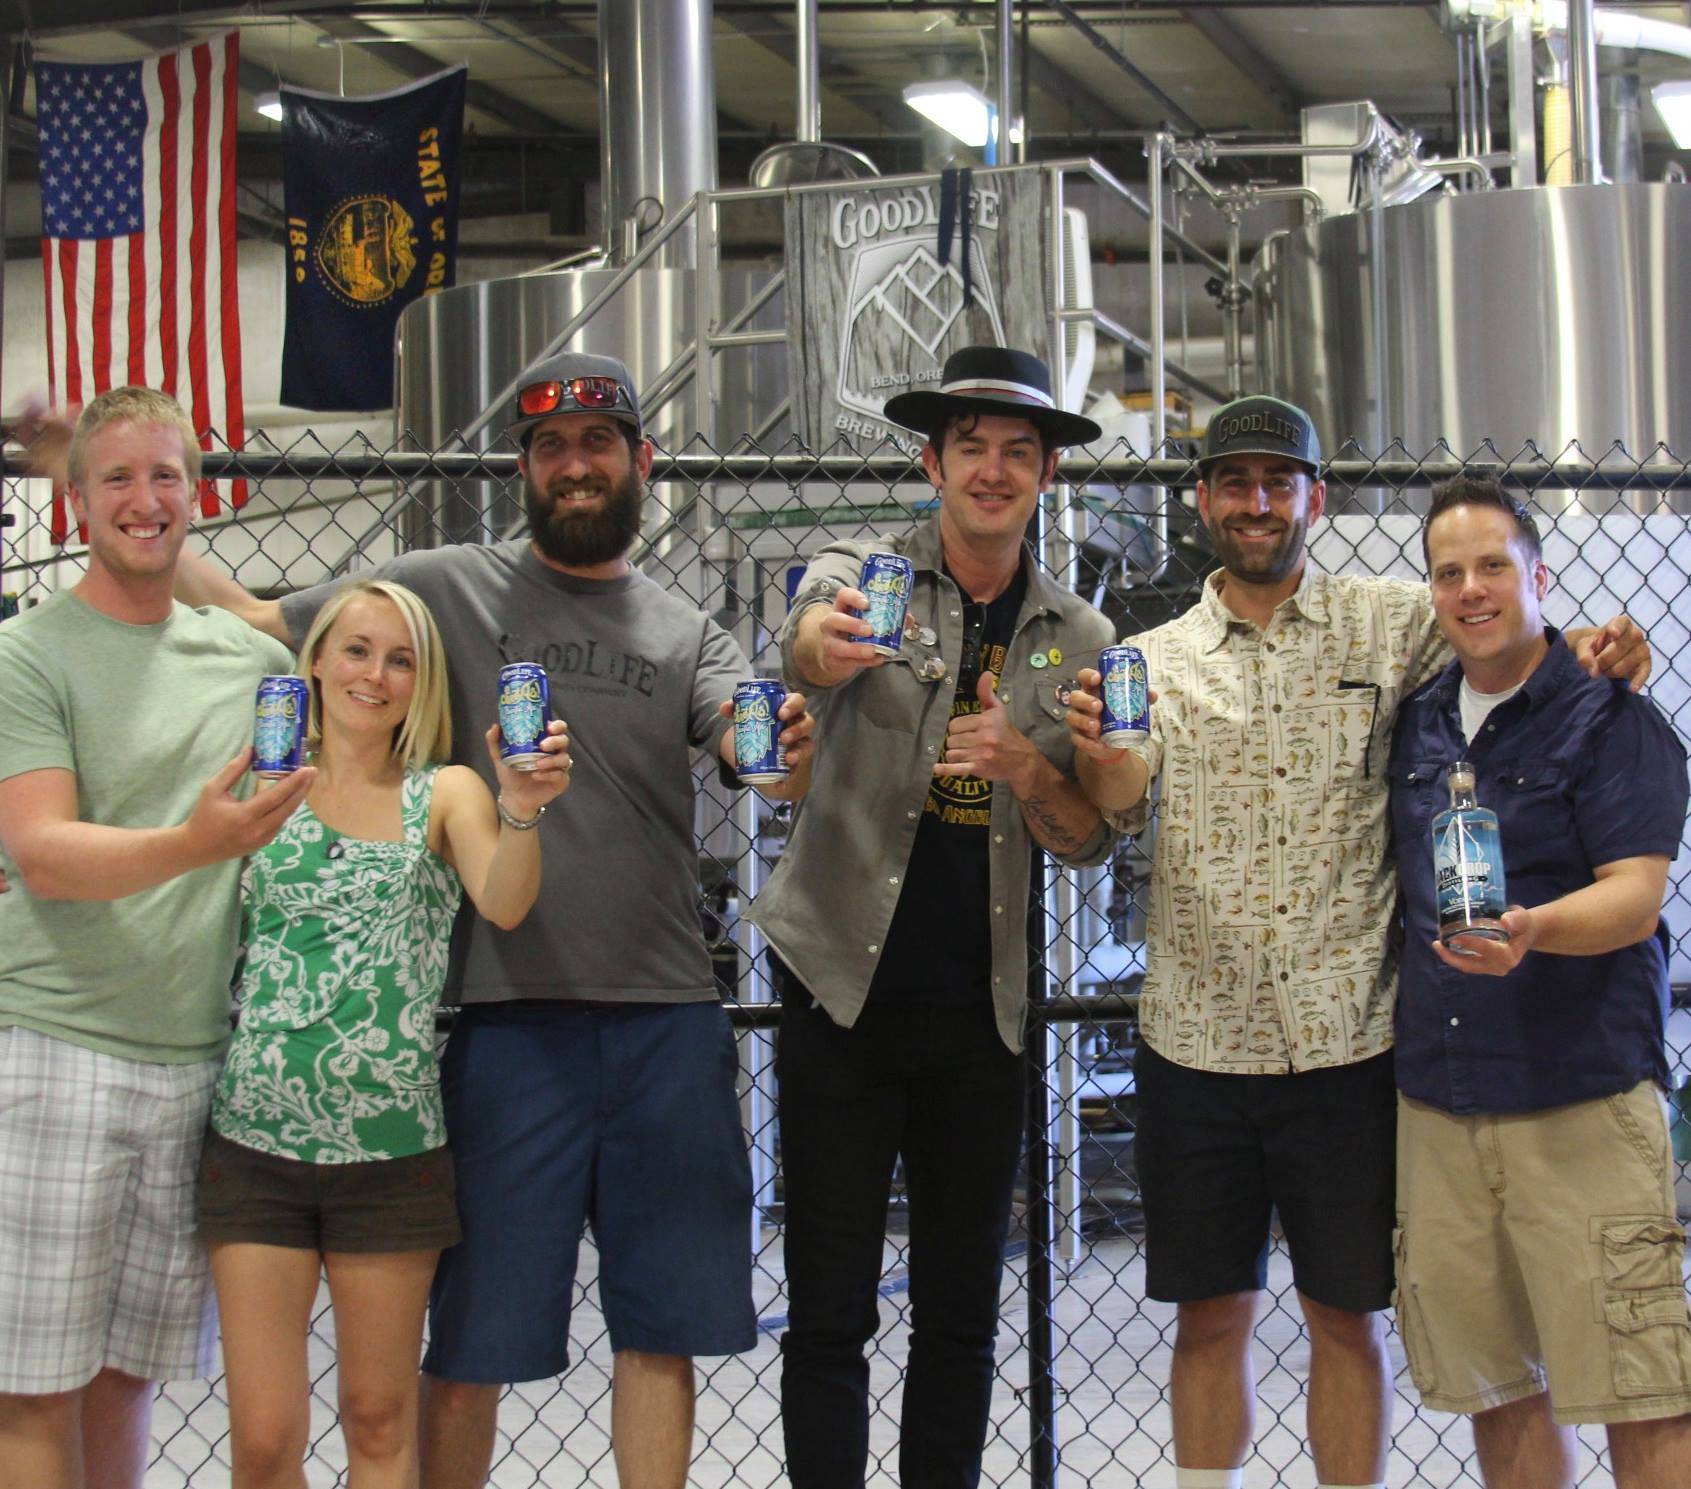 image of G. Love with the team at GoodLife Brewing courtesy of GoodLife Brewing